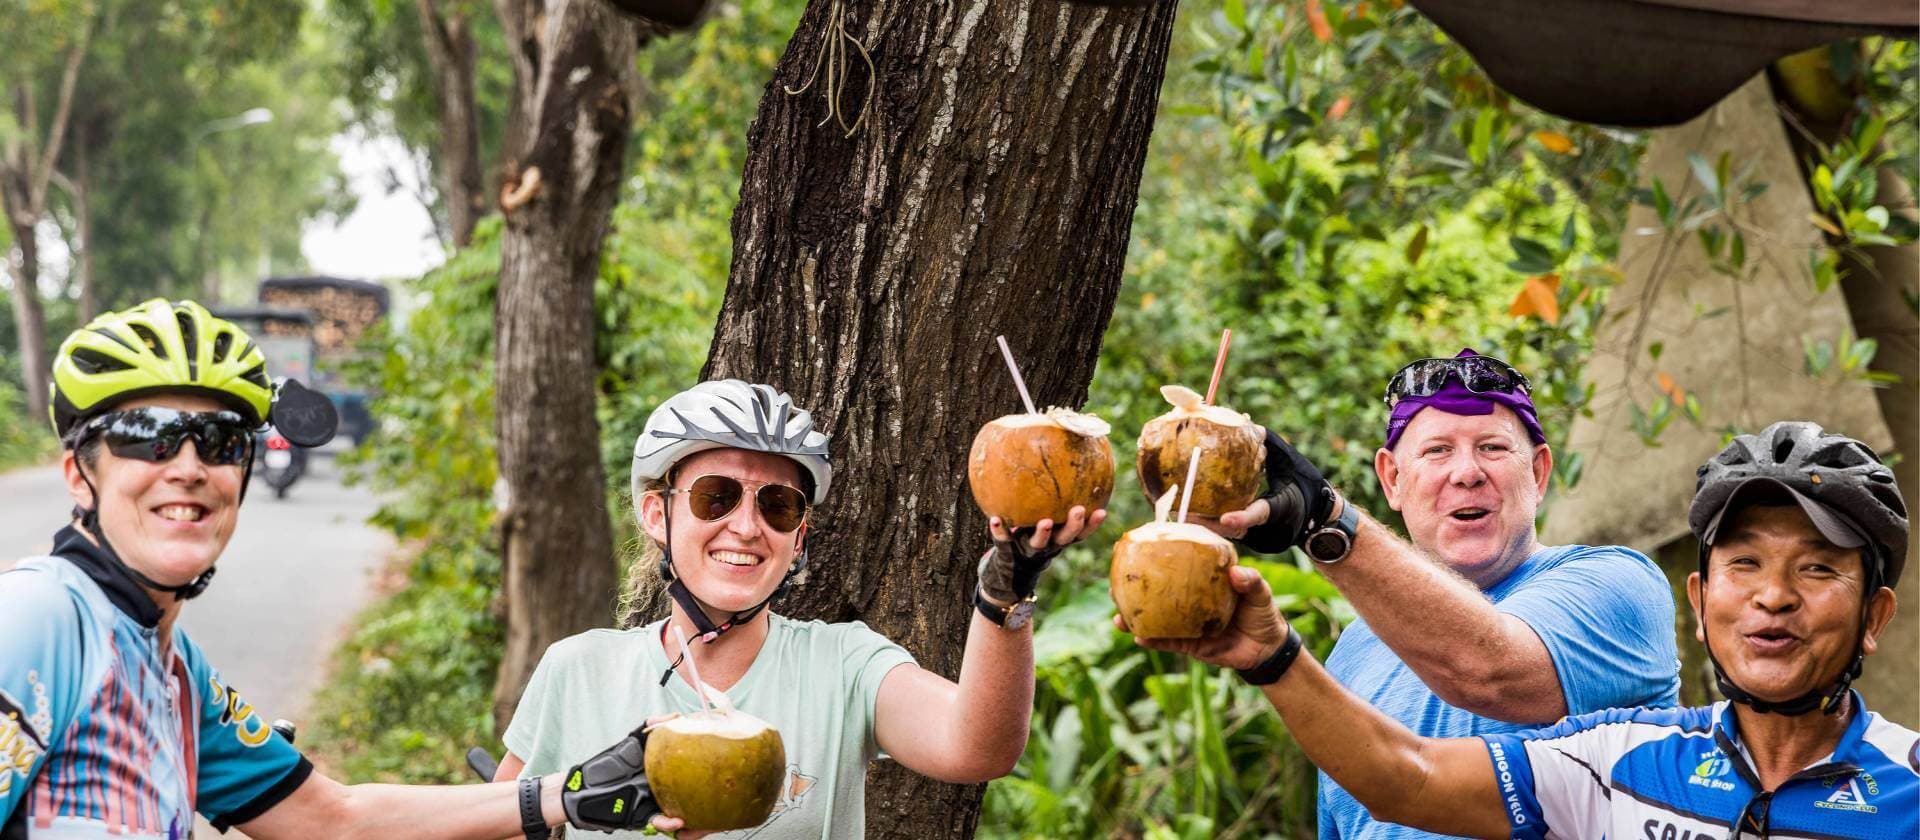 Take a refreshment the cyclists with the taste of natural coconut water